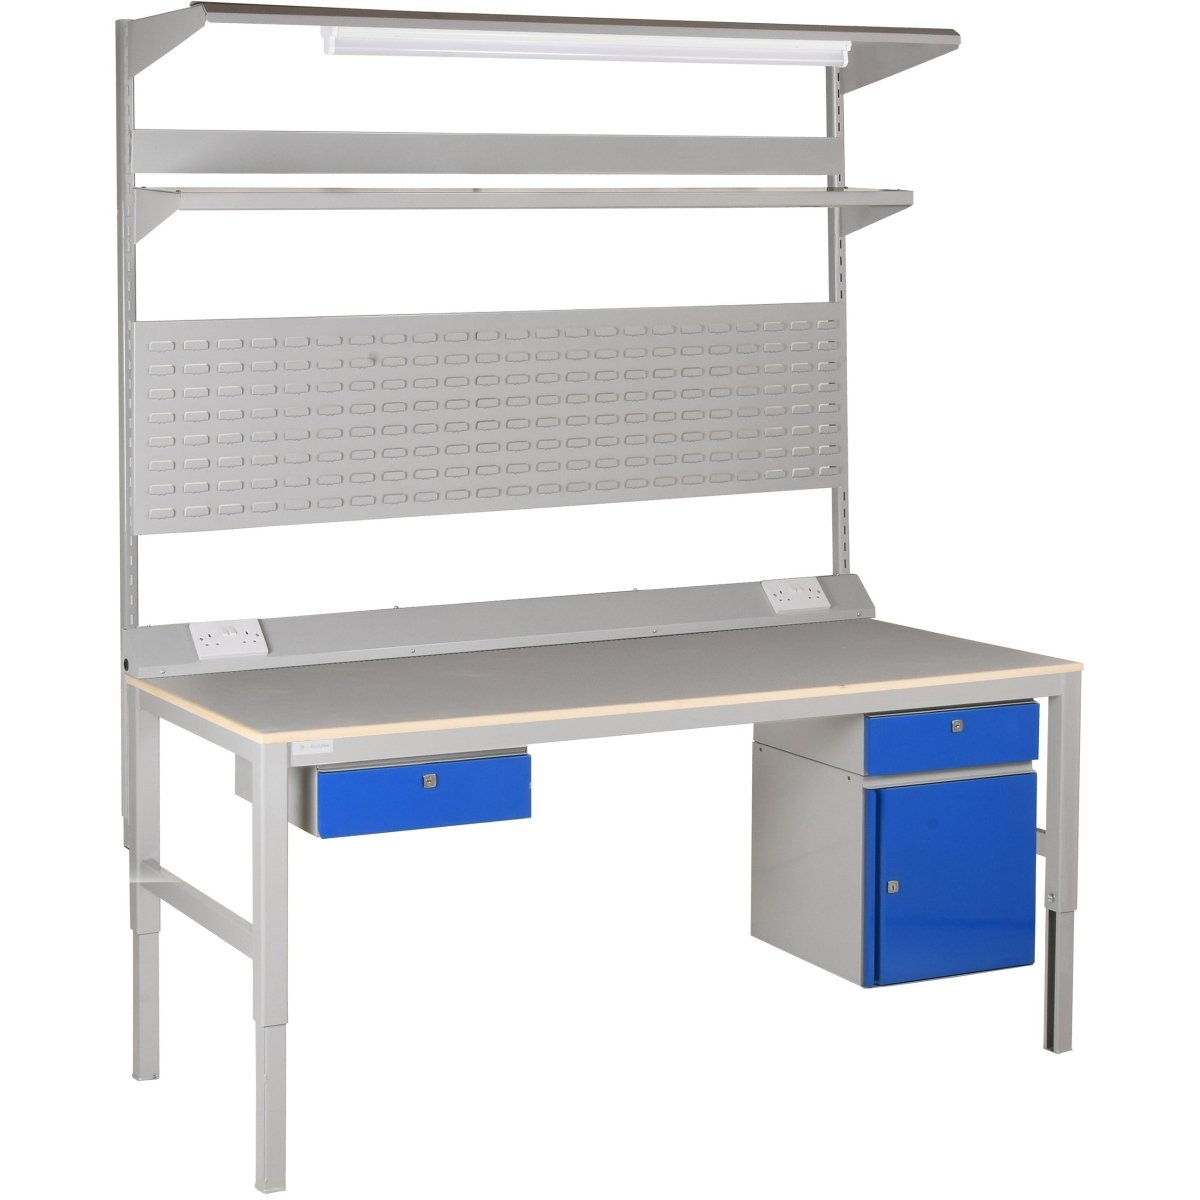 Redditek Bolt Adjustable Work Bench Accessory Combinations As Illustrated - Warehouse Storage Products